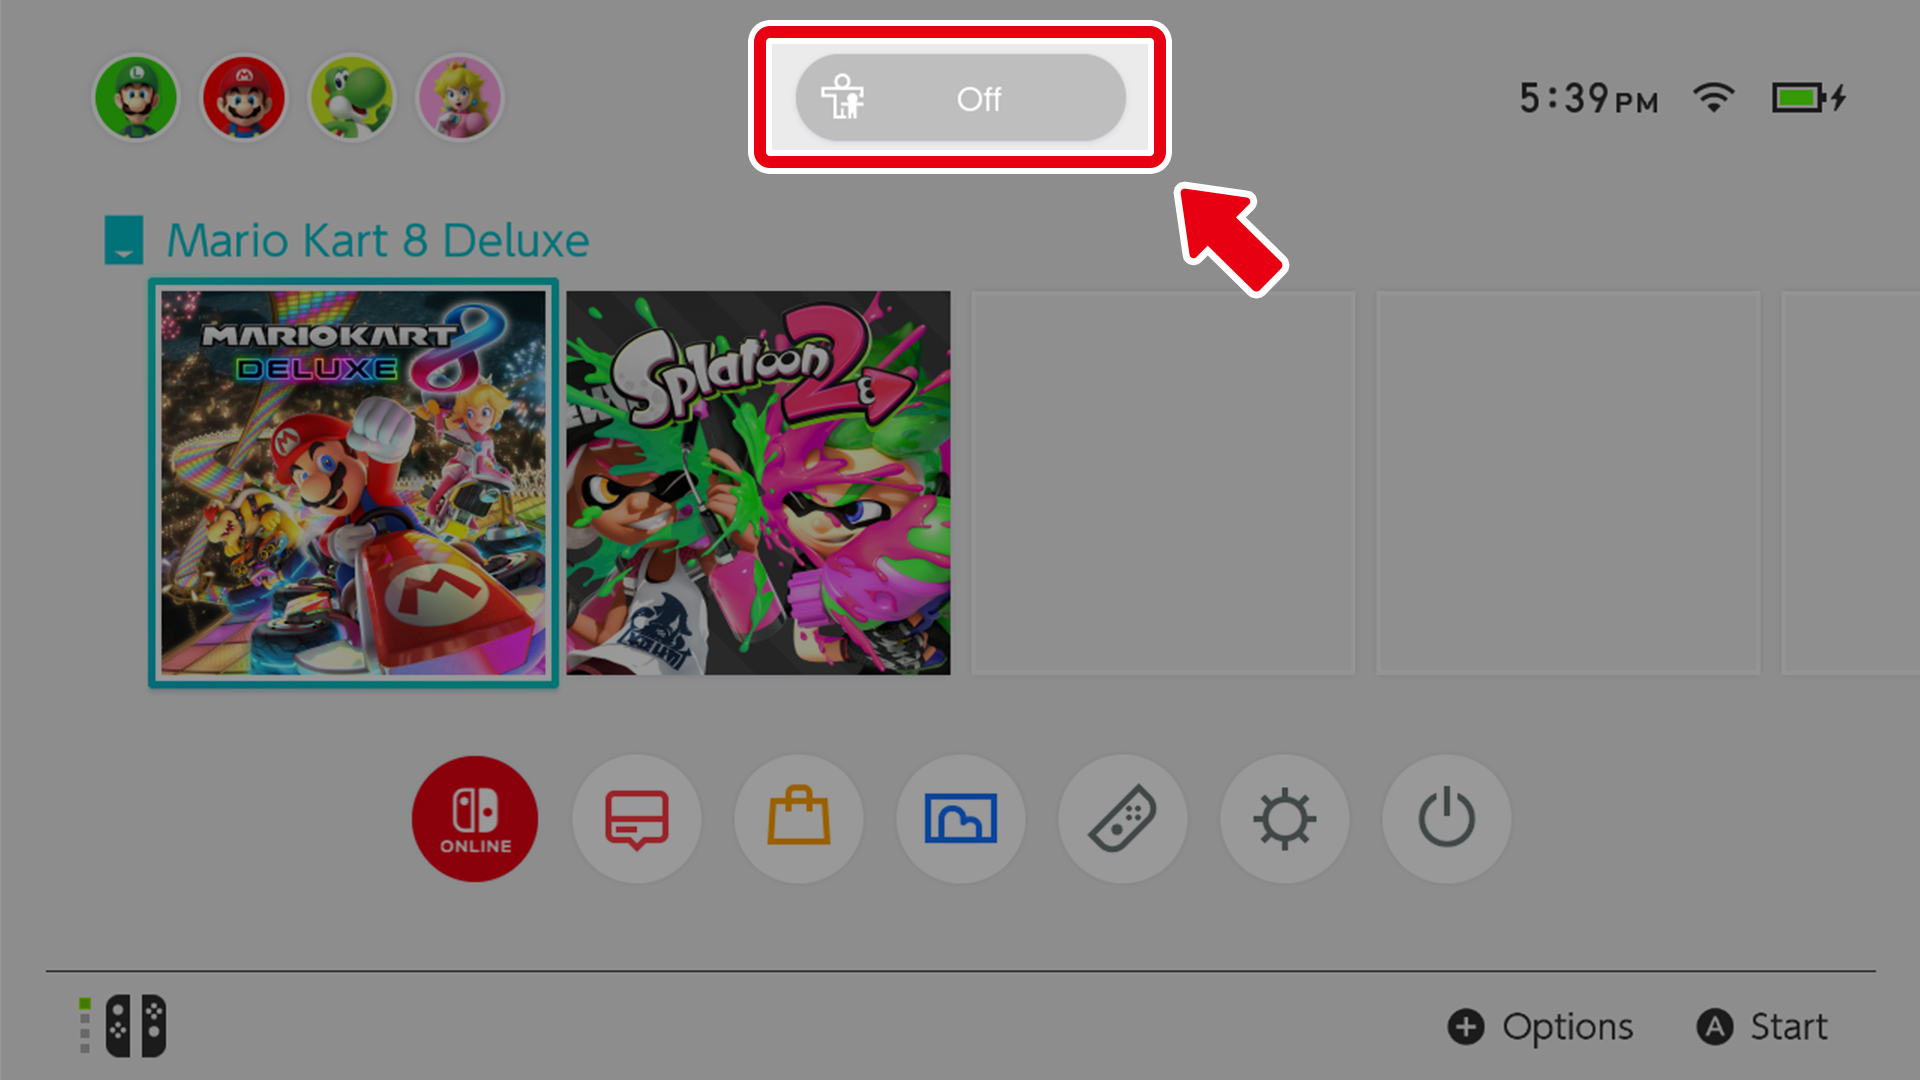 How to Block Apps on Nintendo Switch